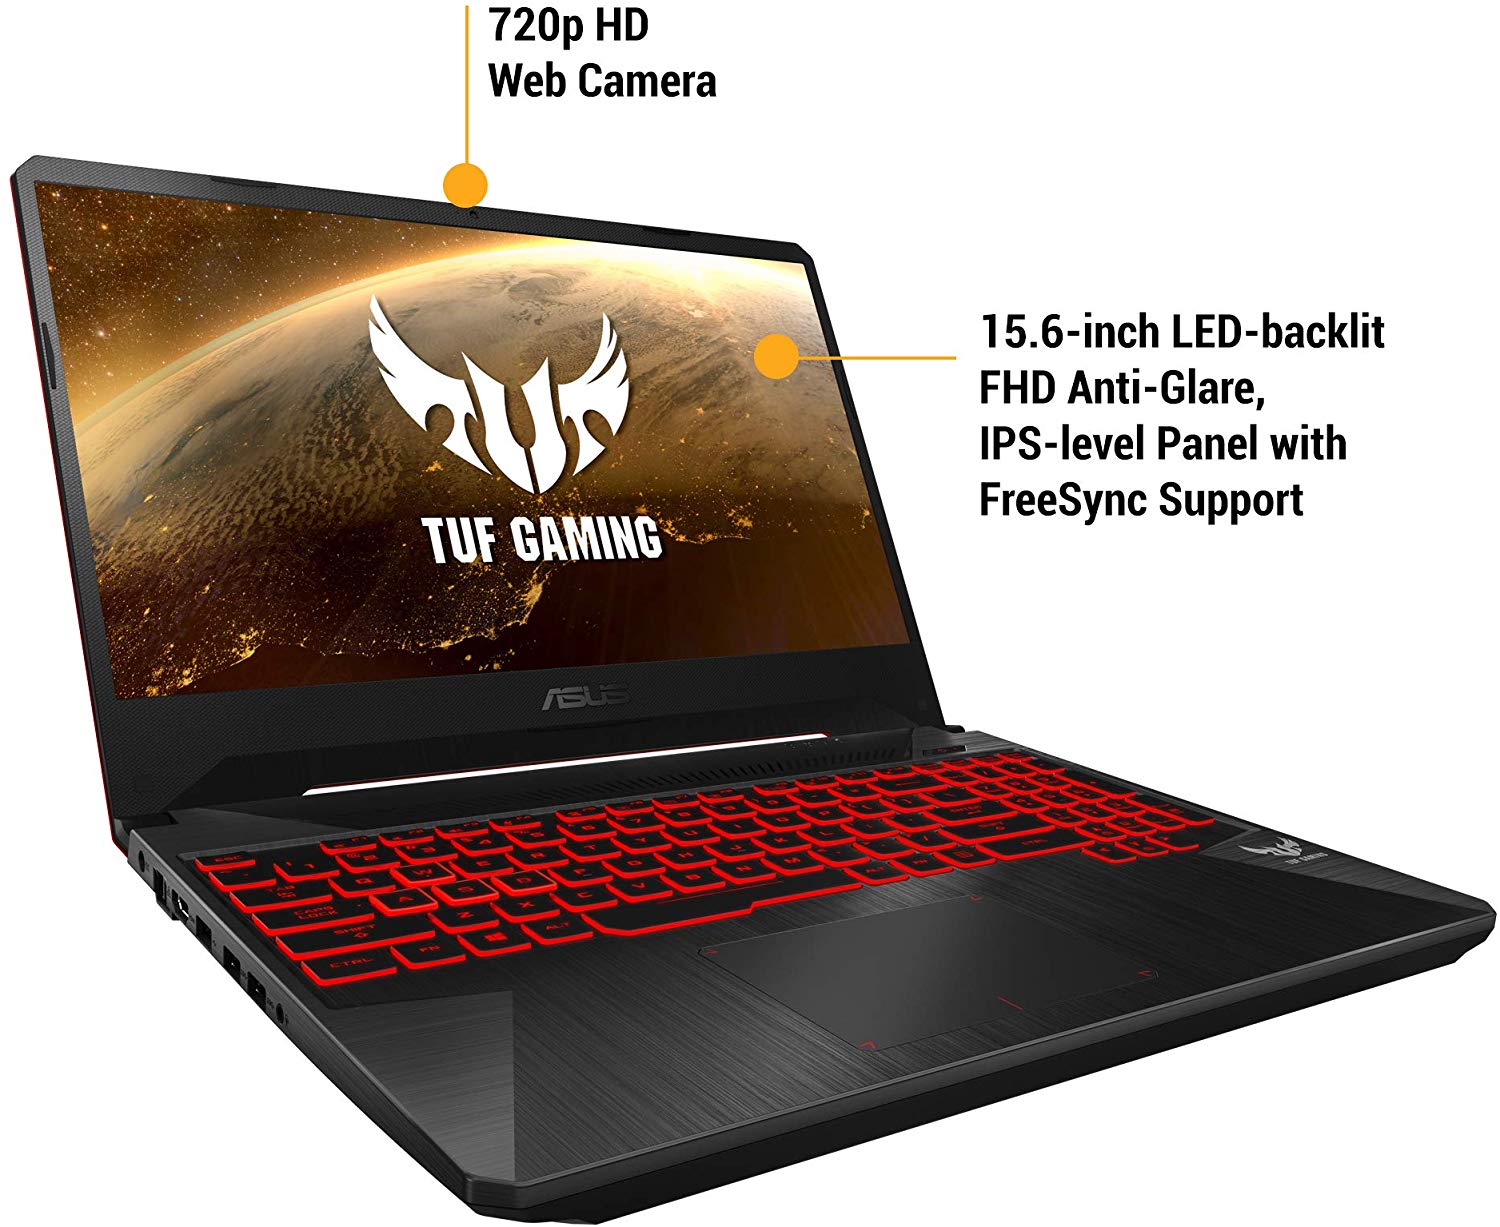 Discount Offer On Amazon - Up To 39% Off On Gaming Laptops Starting @ ₹46,990